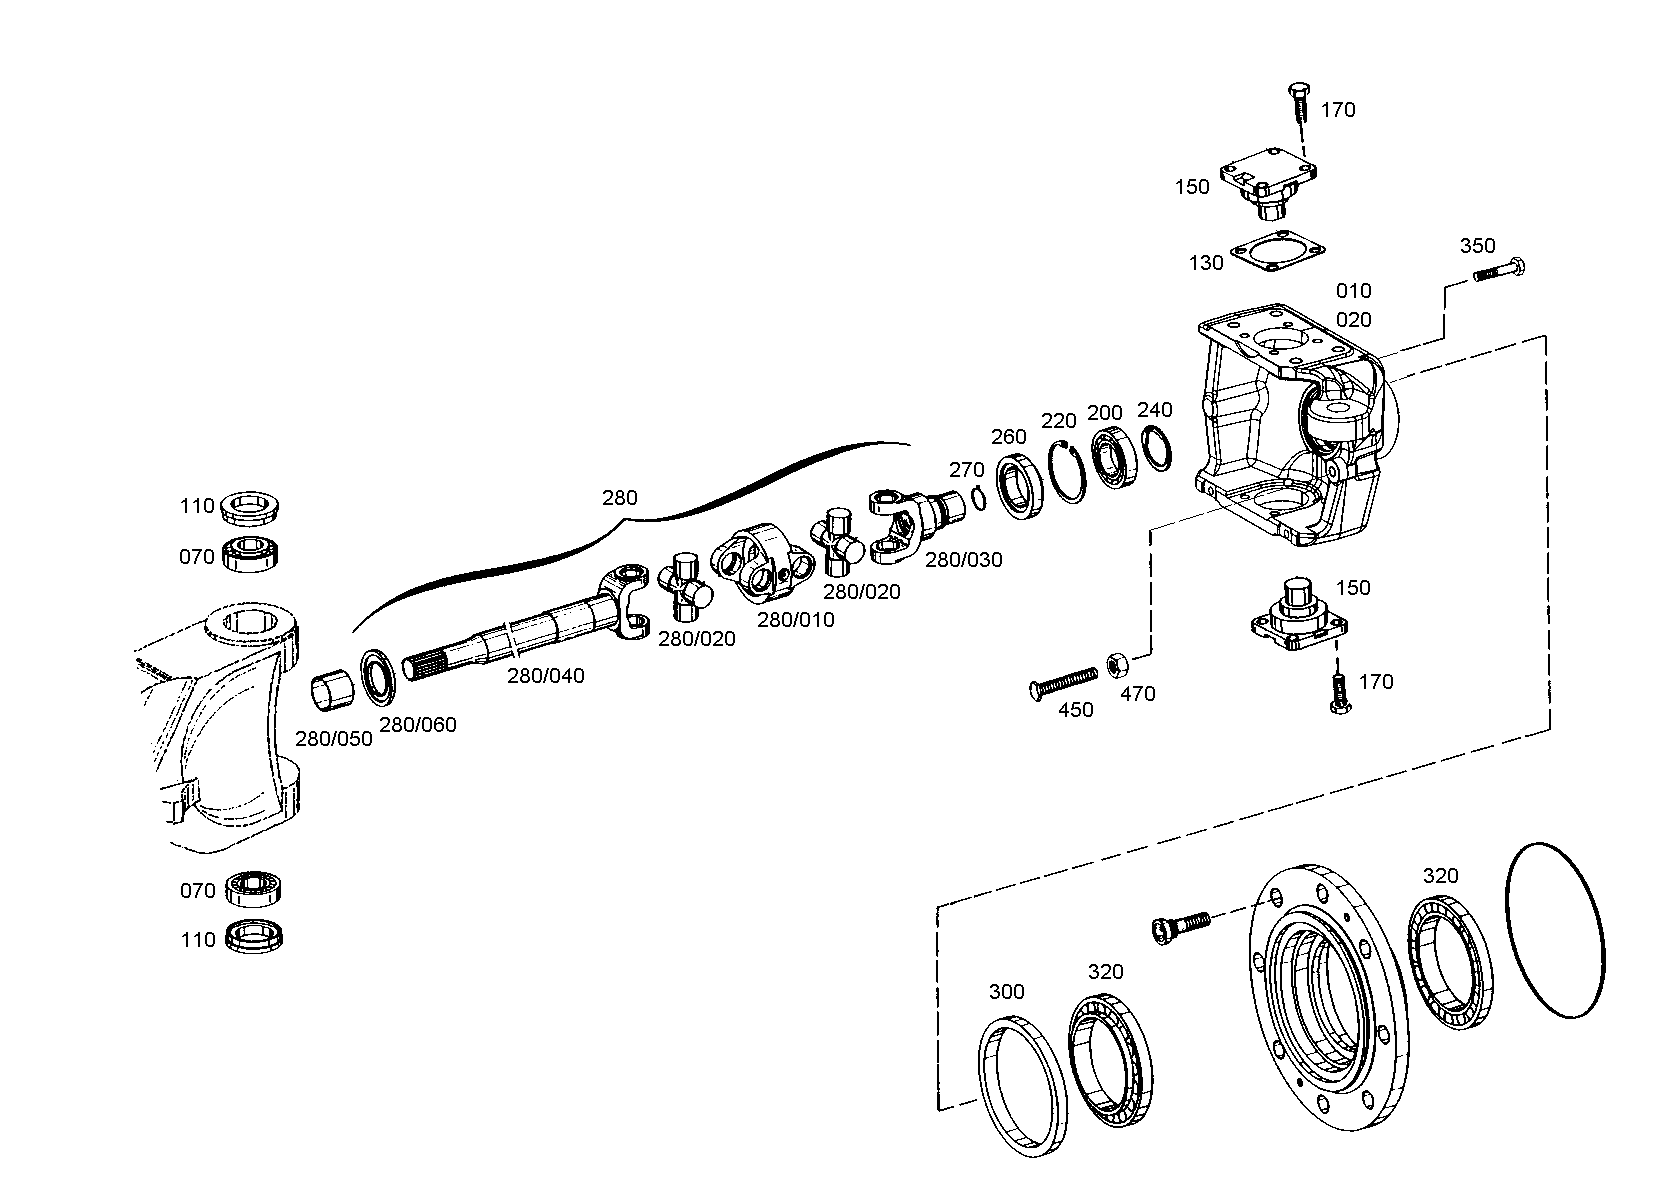 drawing for AGCO F510300020540 - SCREEN SHEET (figure 5)